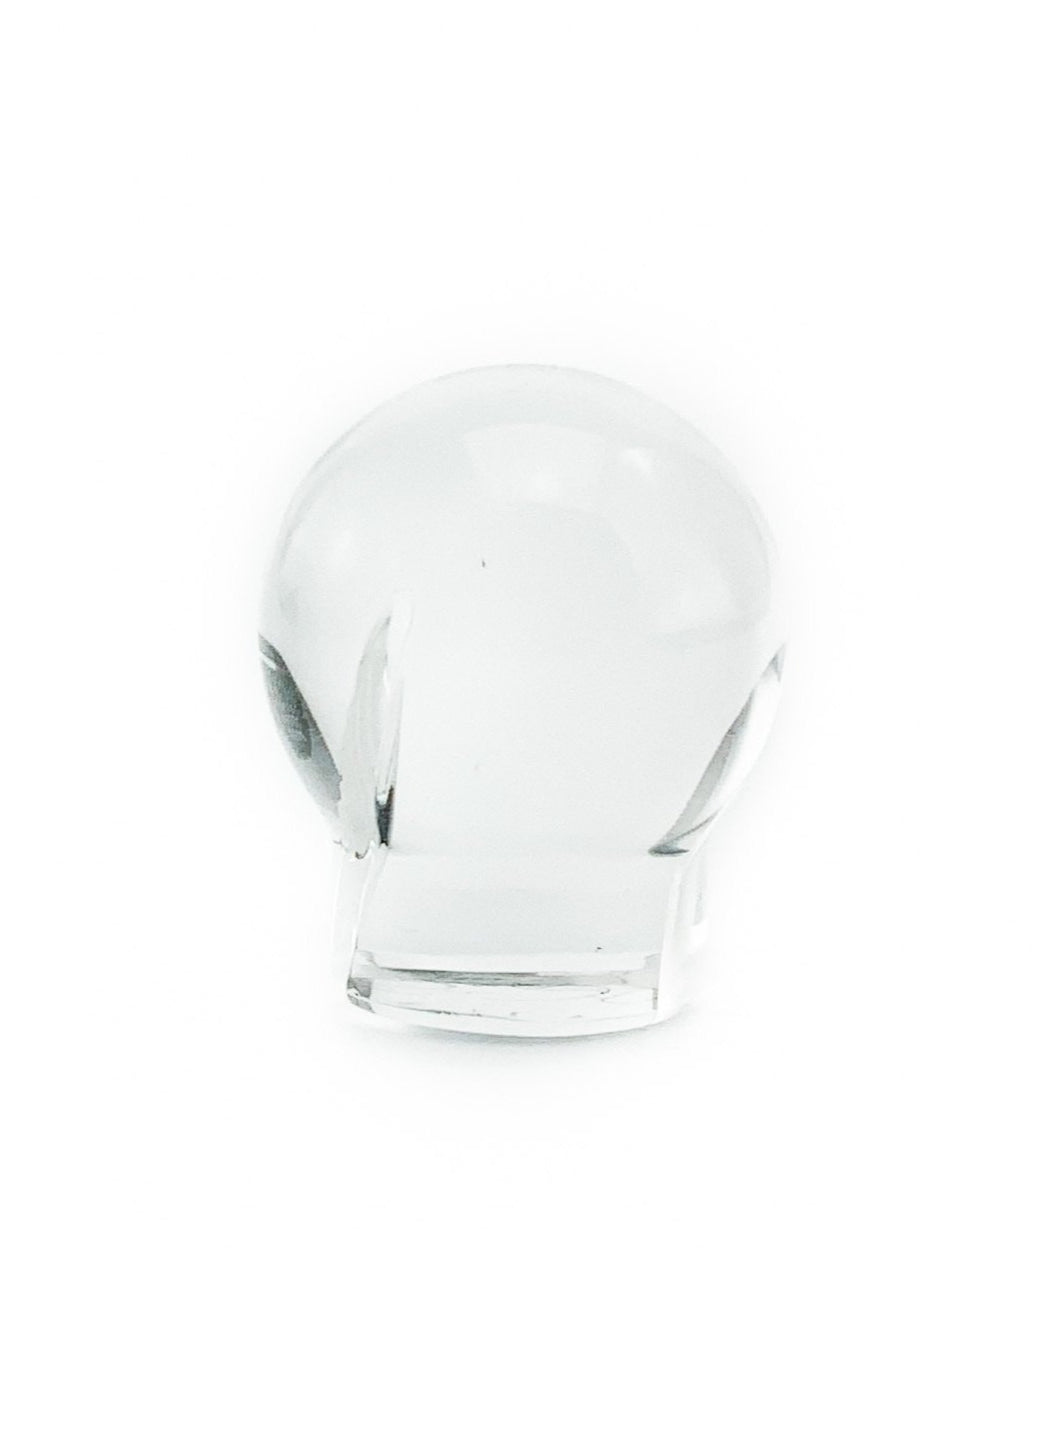 OTP Glass - Spinner Cap Clear